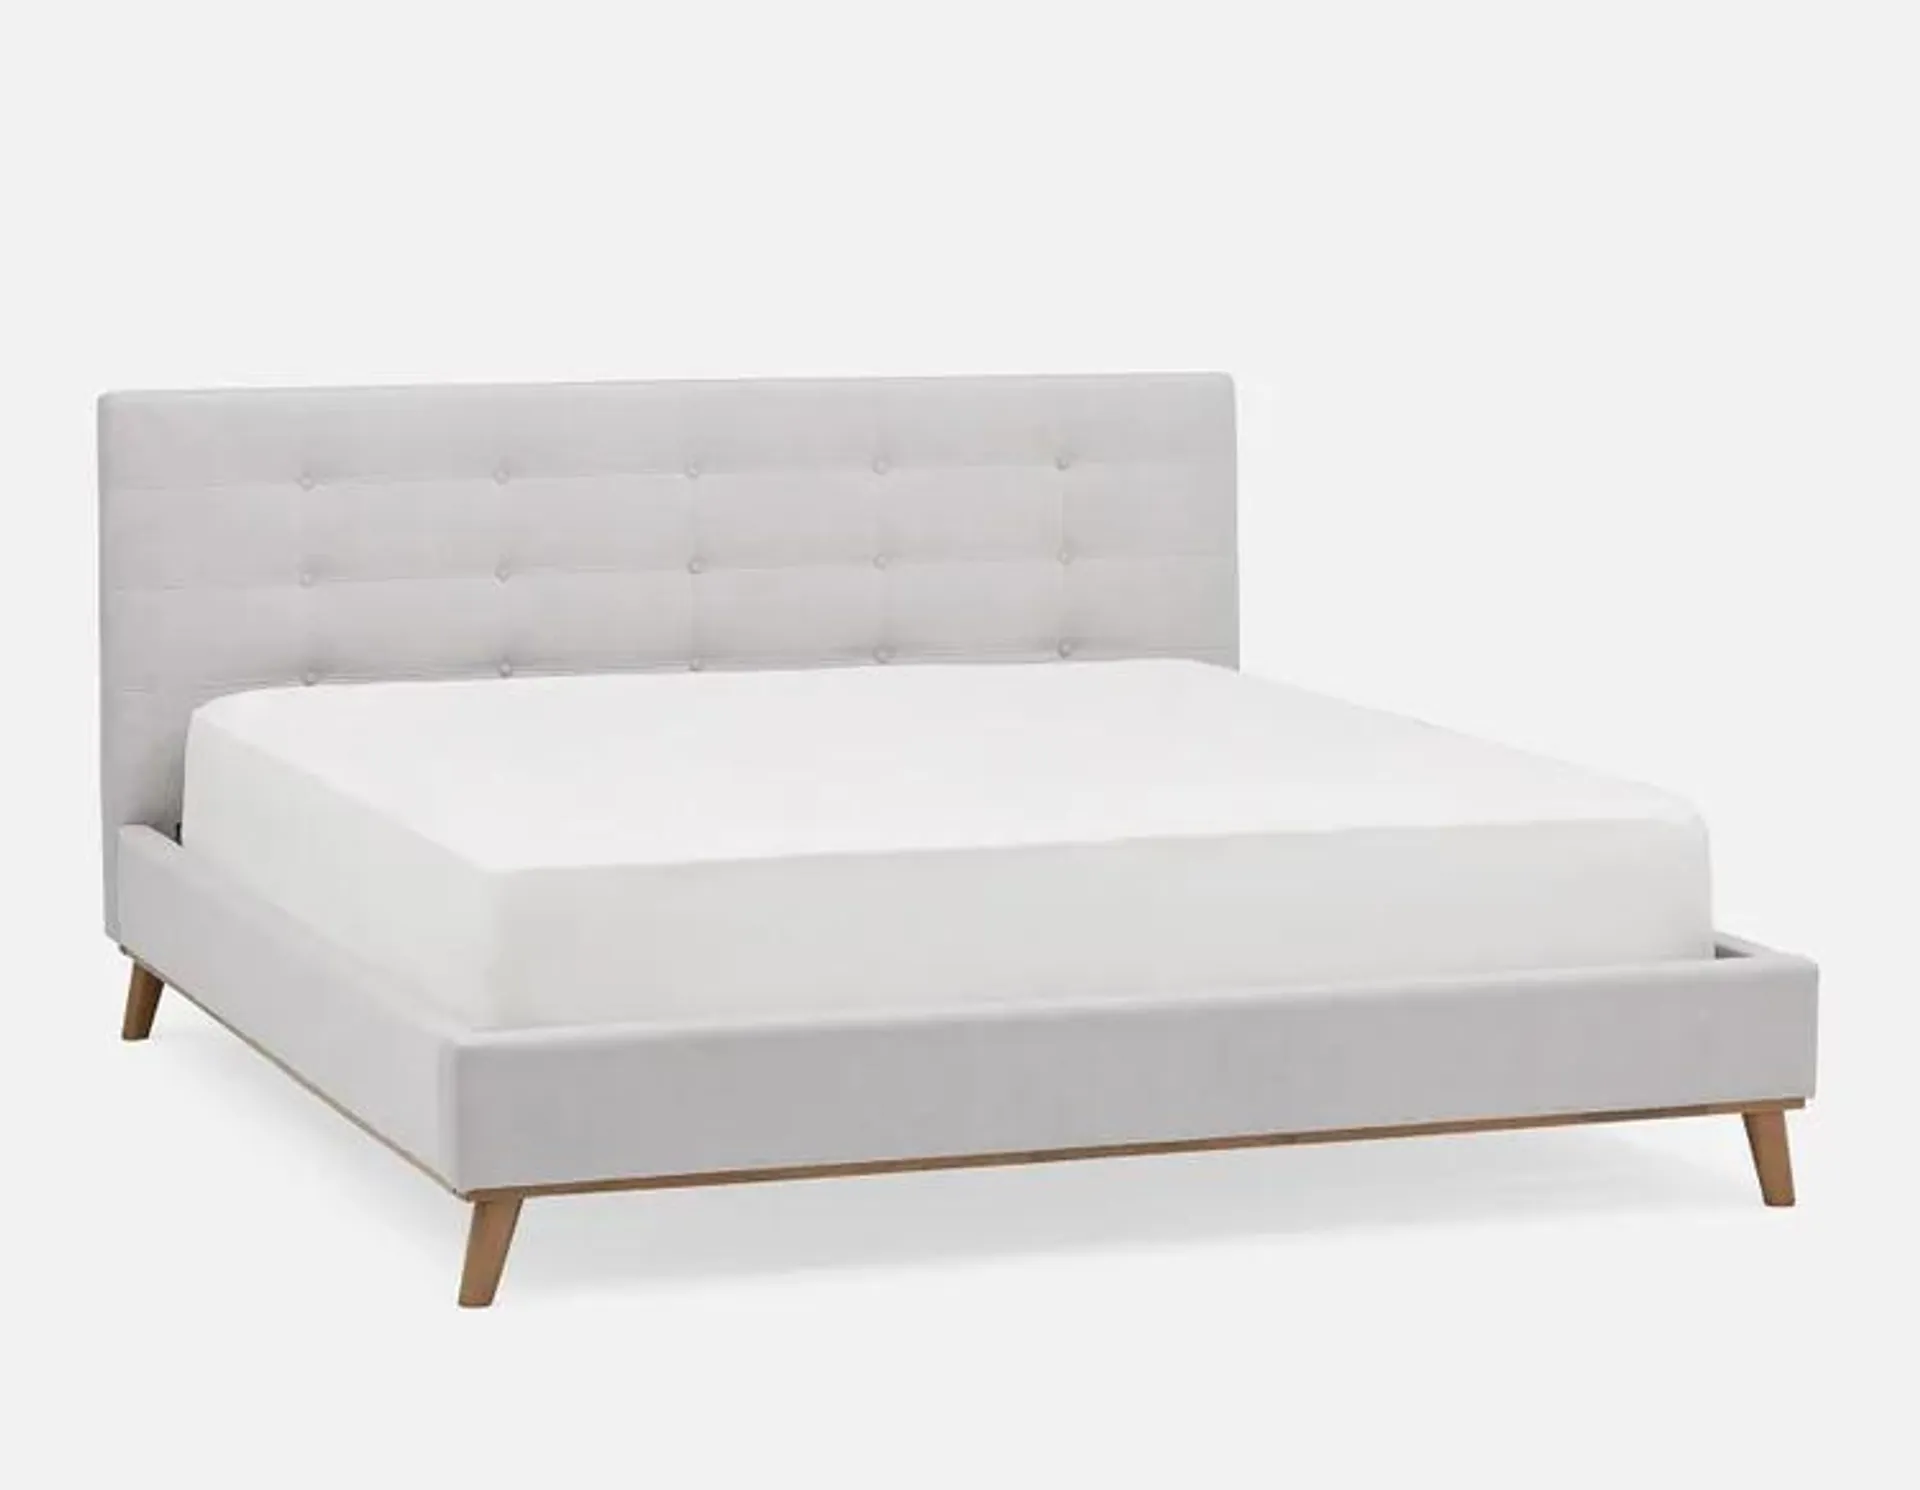 CARME tufted upholstered king size bed